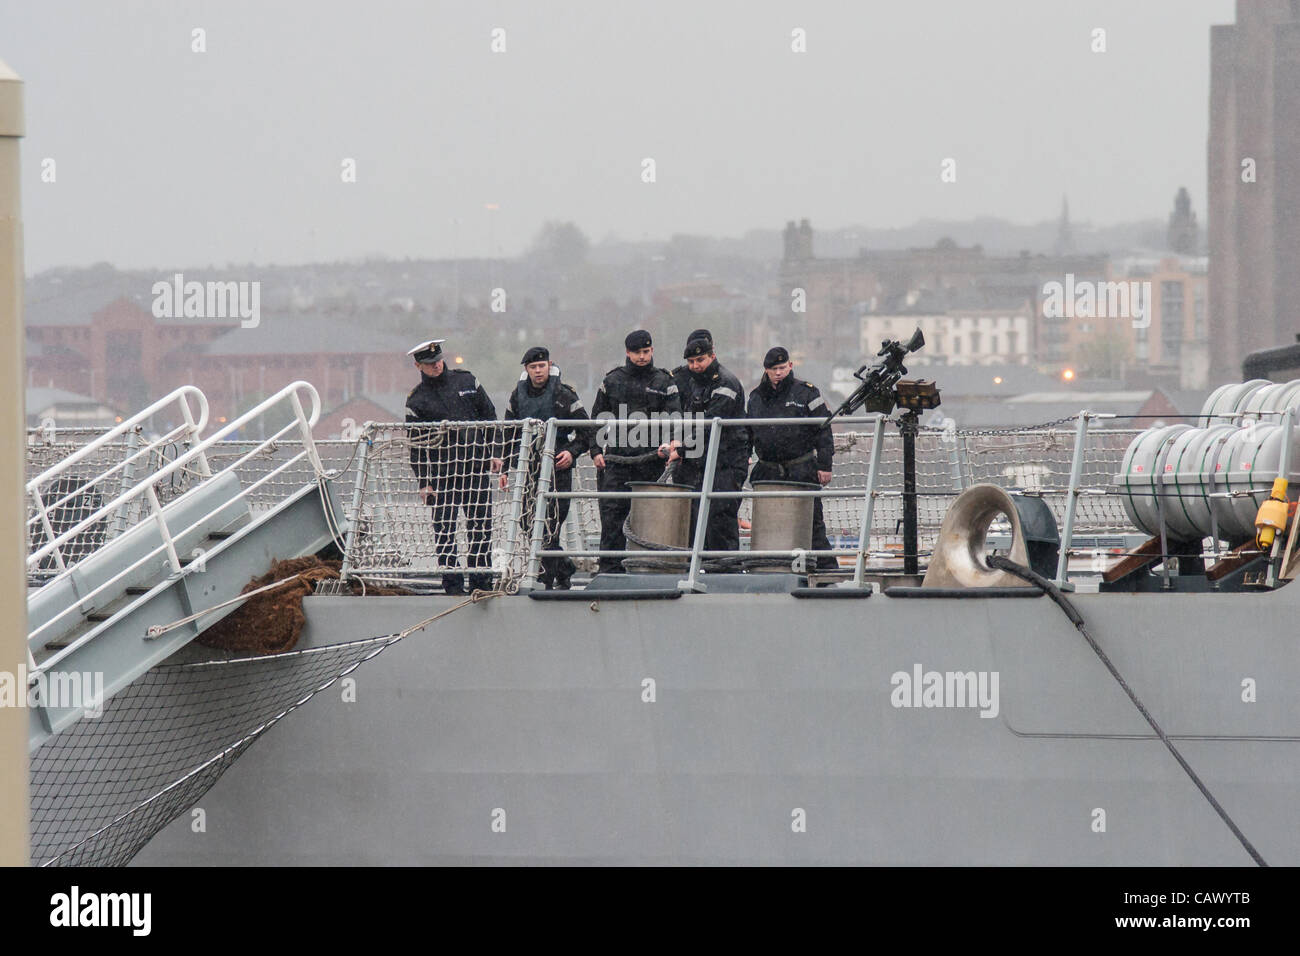 The crew of HMS Dragon Royal Navy Battleship preparing to leave Liverpool on the River Mersey following a three day visit. Stock Photo